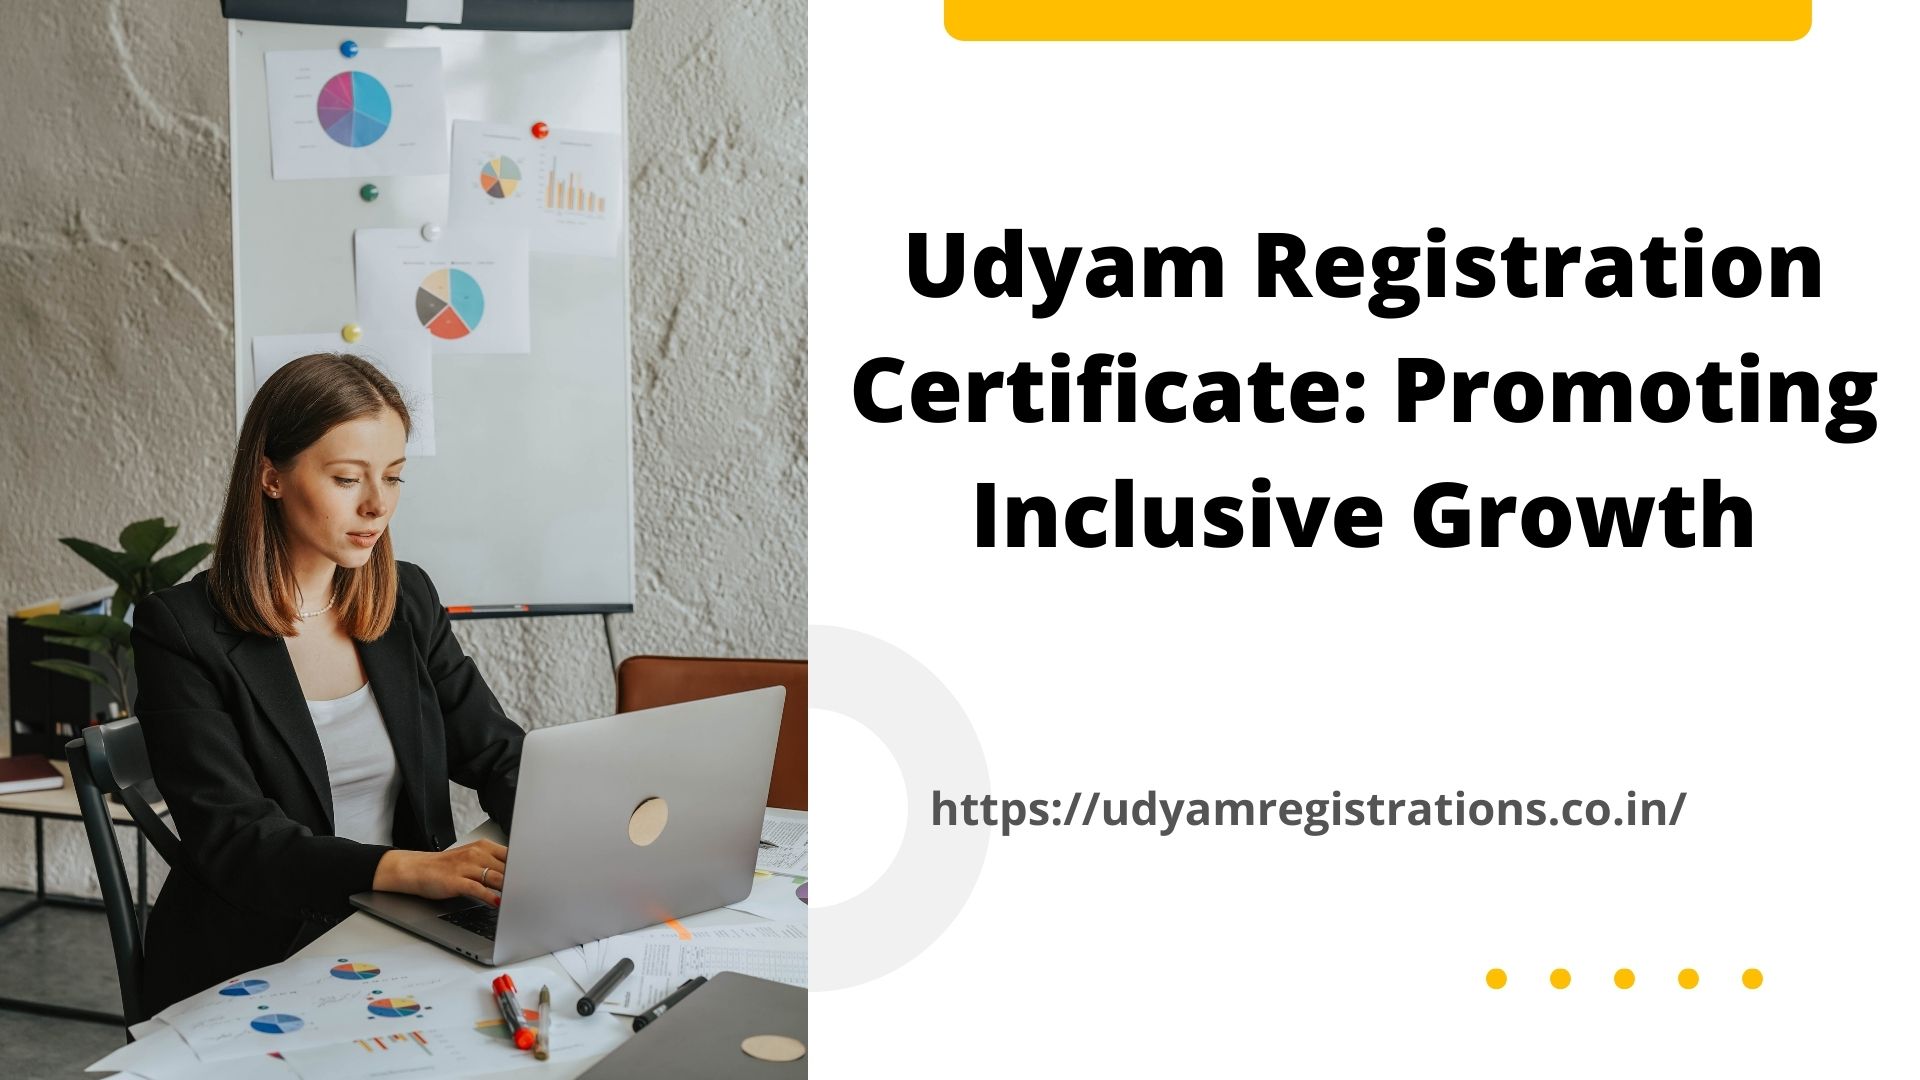 Udyam Registration Certificate: Promoting Inclusive Growth